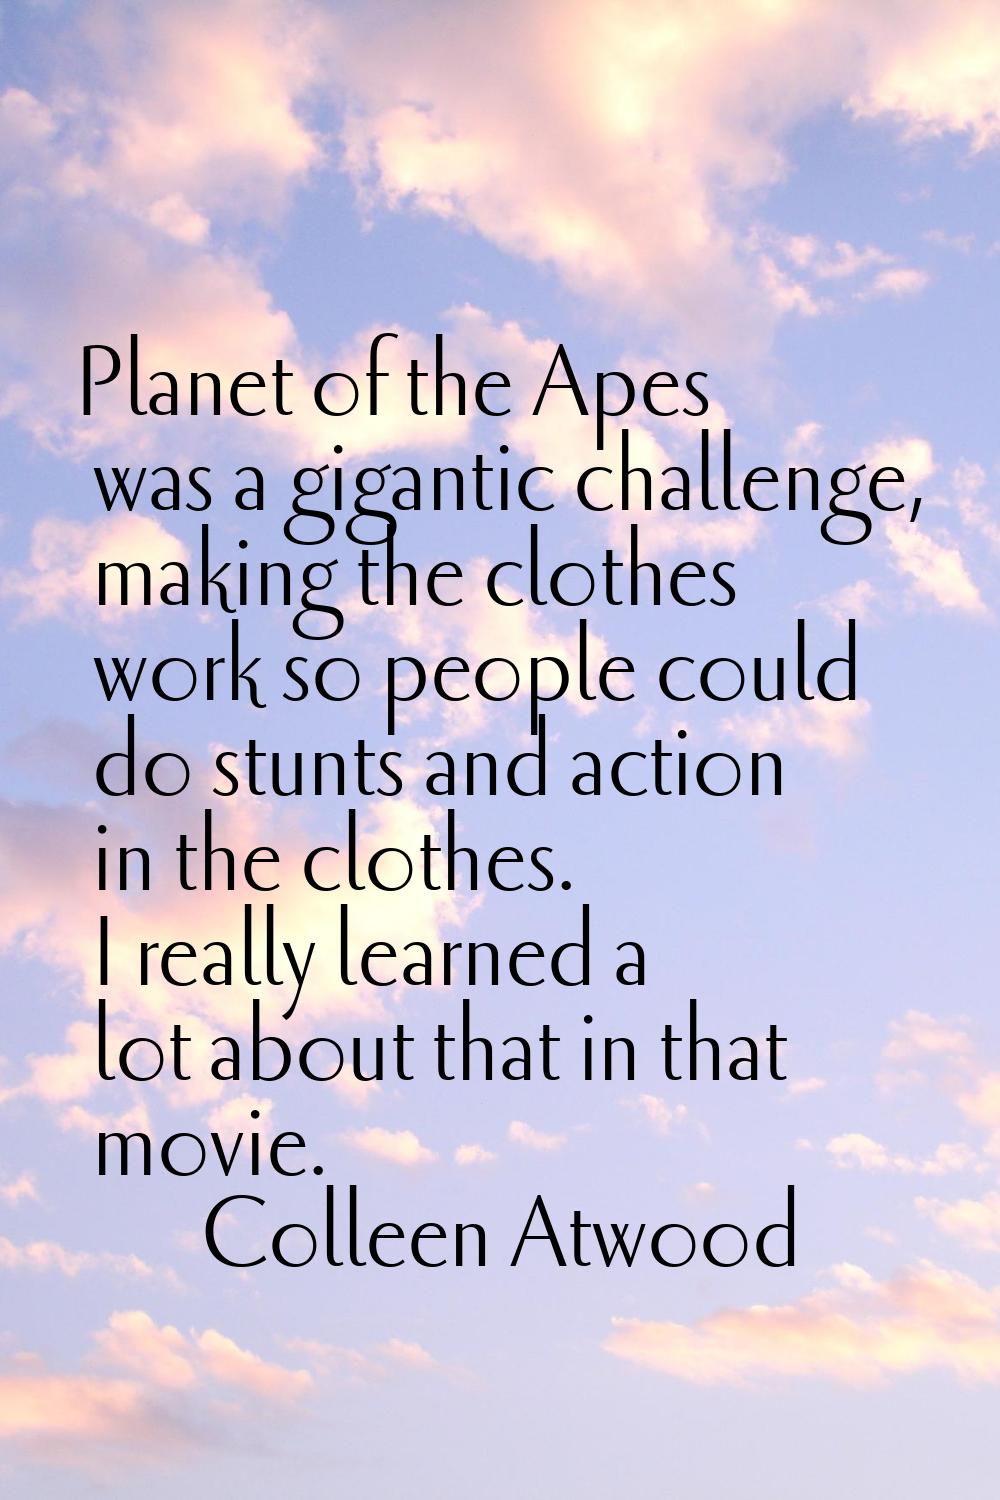 Planet of the Apes was a gigantic challenge, making the clothes work so people could do stunts and 